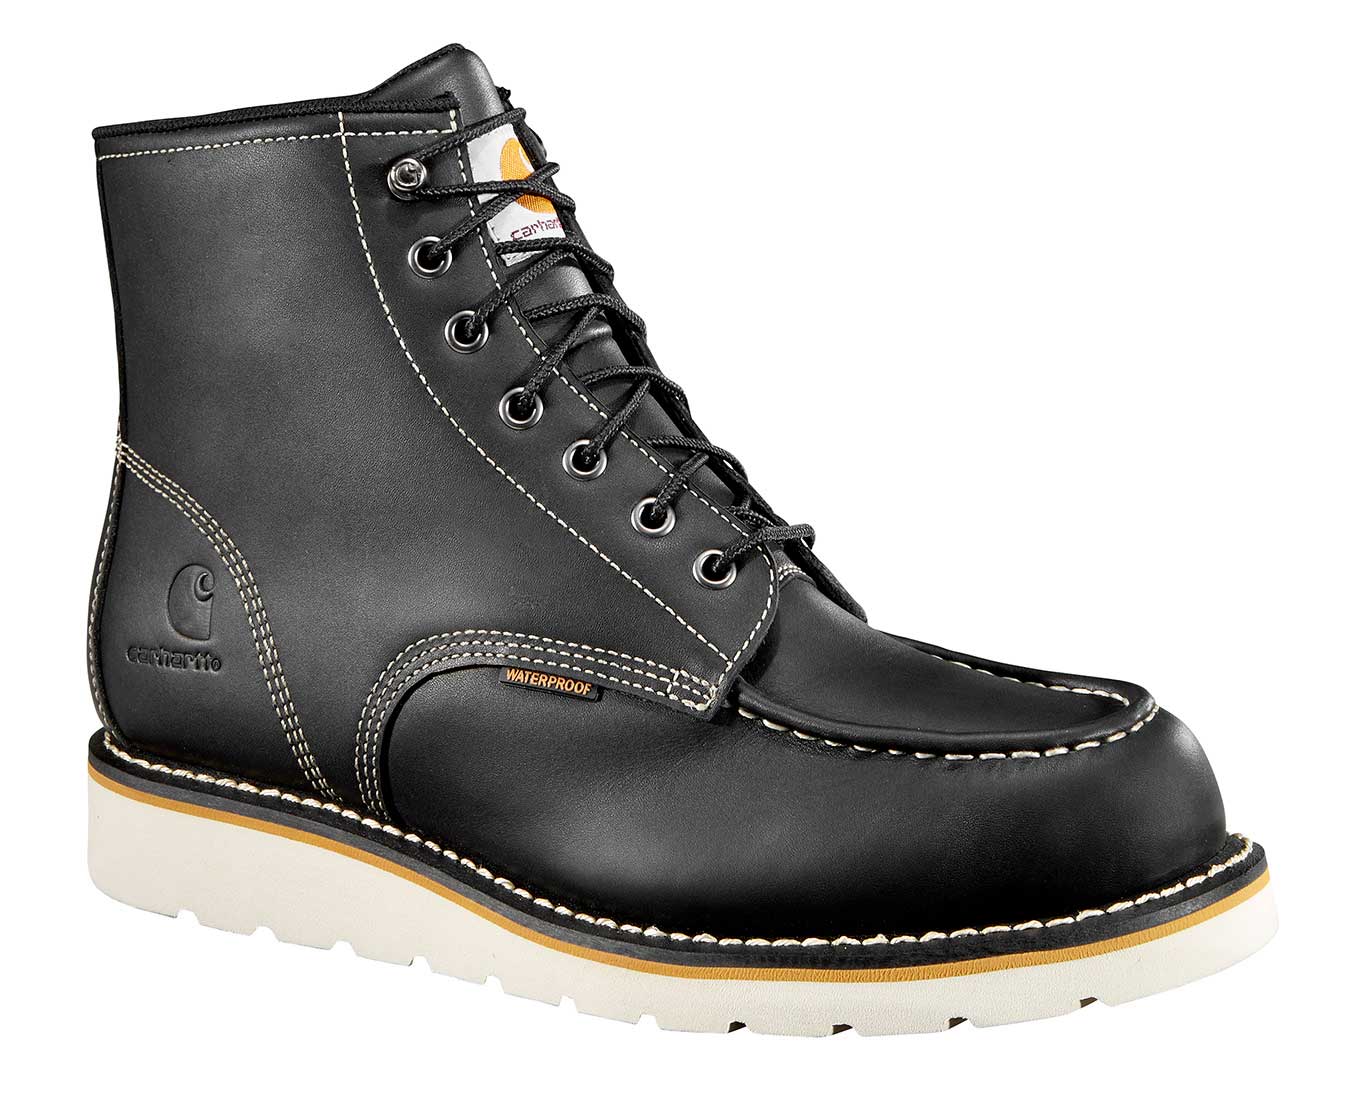 mens non safety work boots